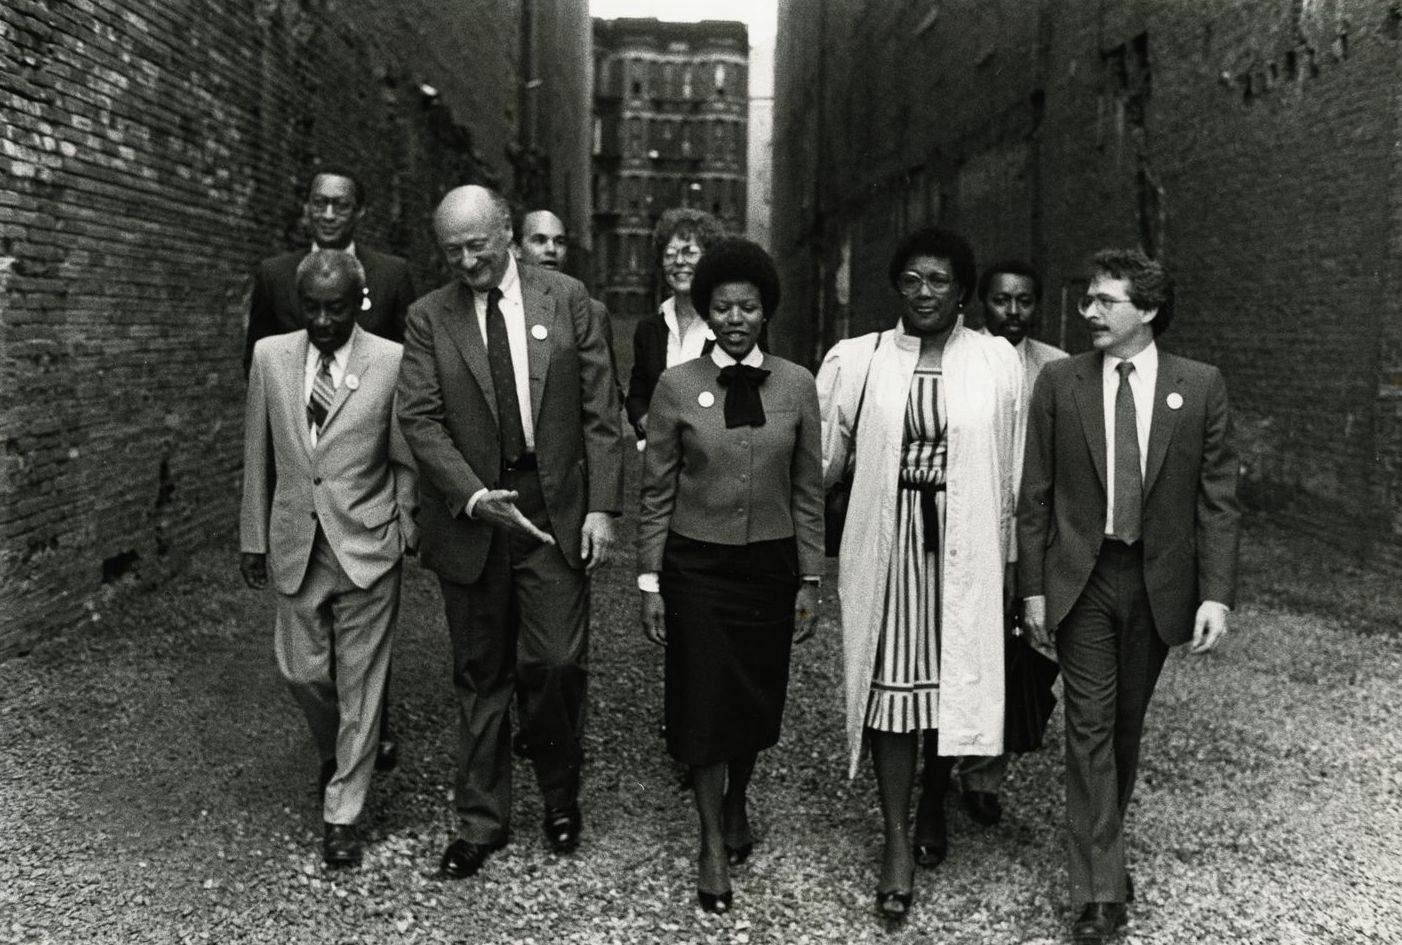 A black-and-white photograph of a group of people dressed in business attire walking together between two buildings in New York City.